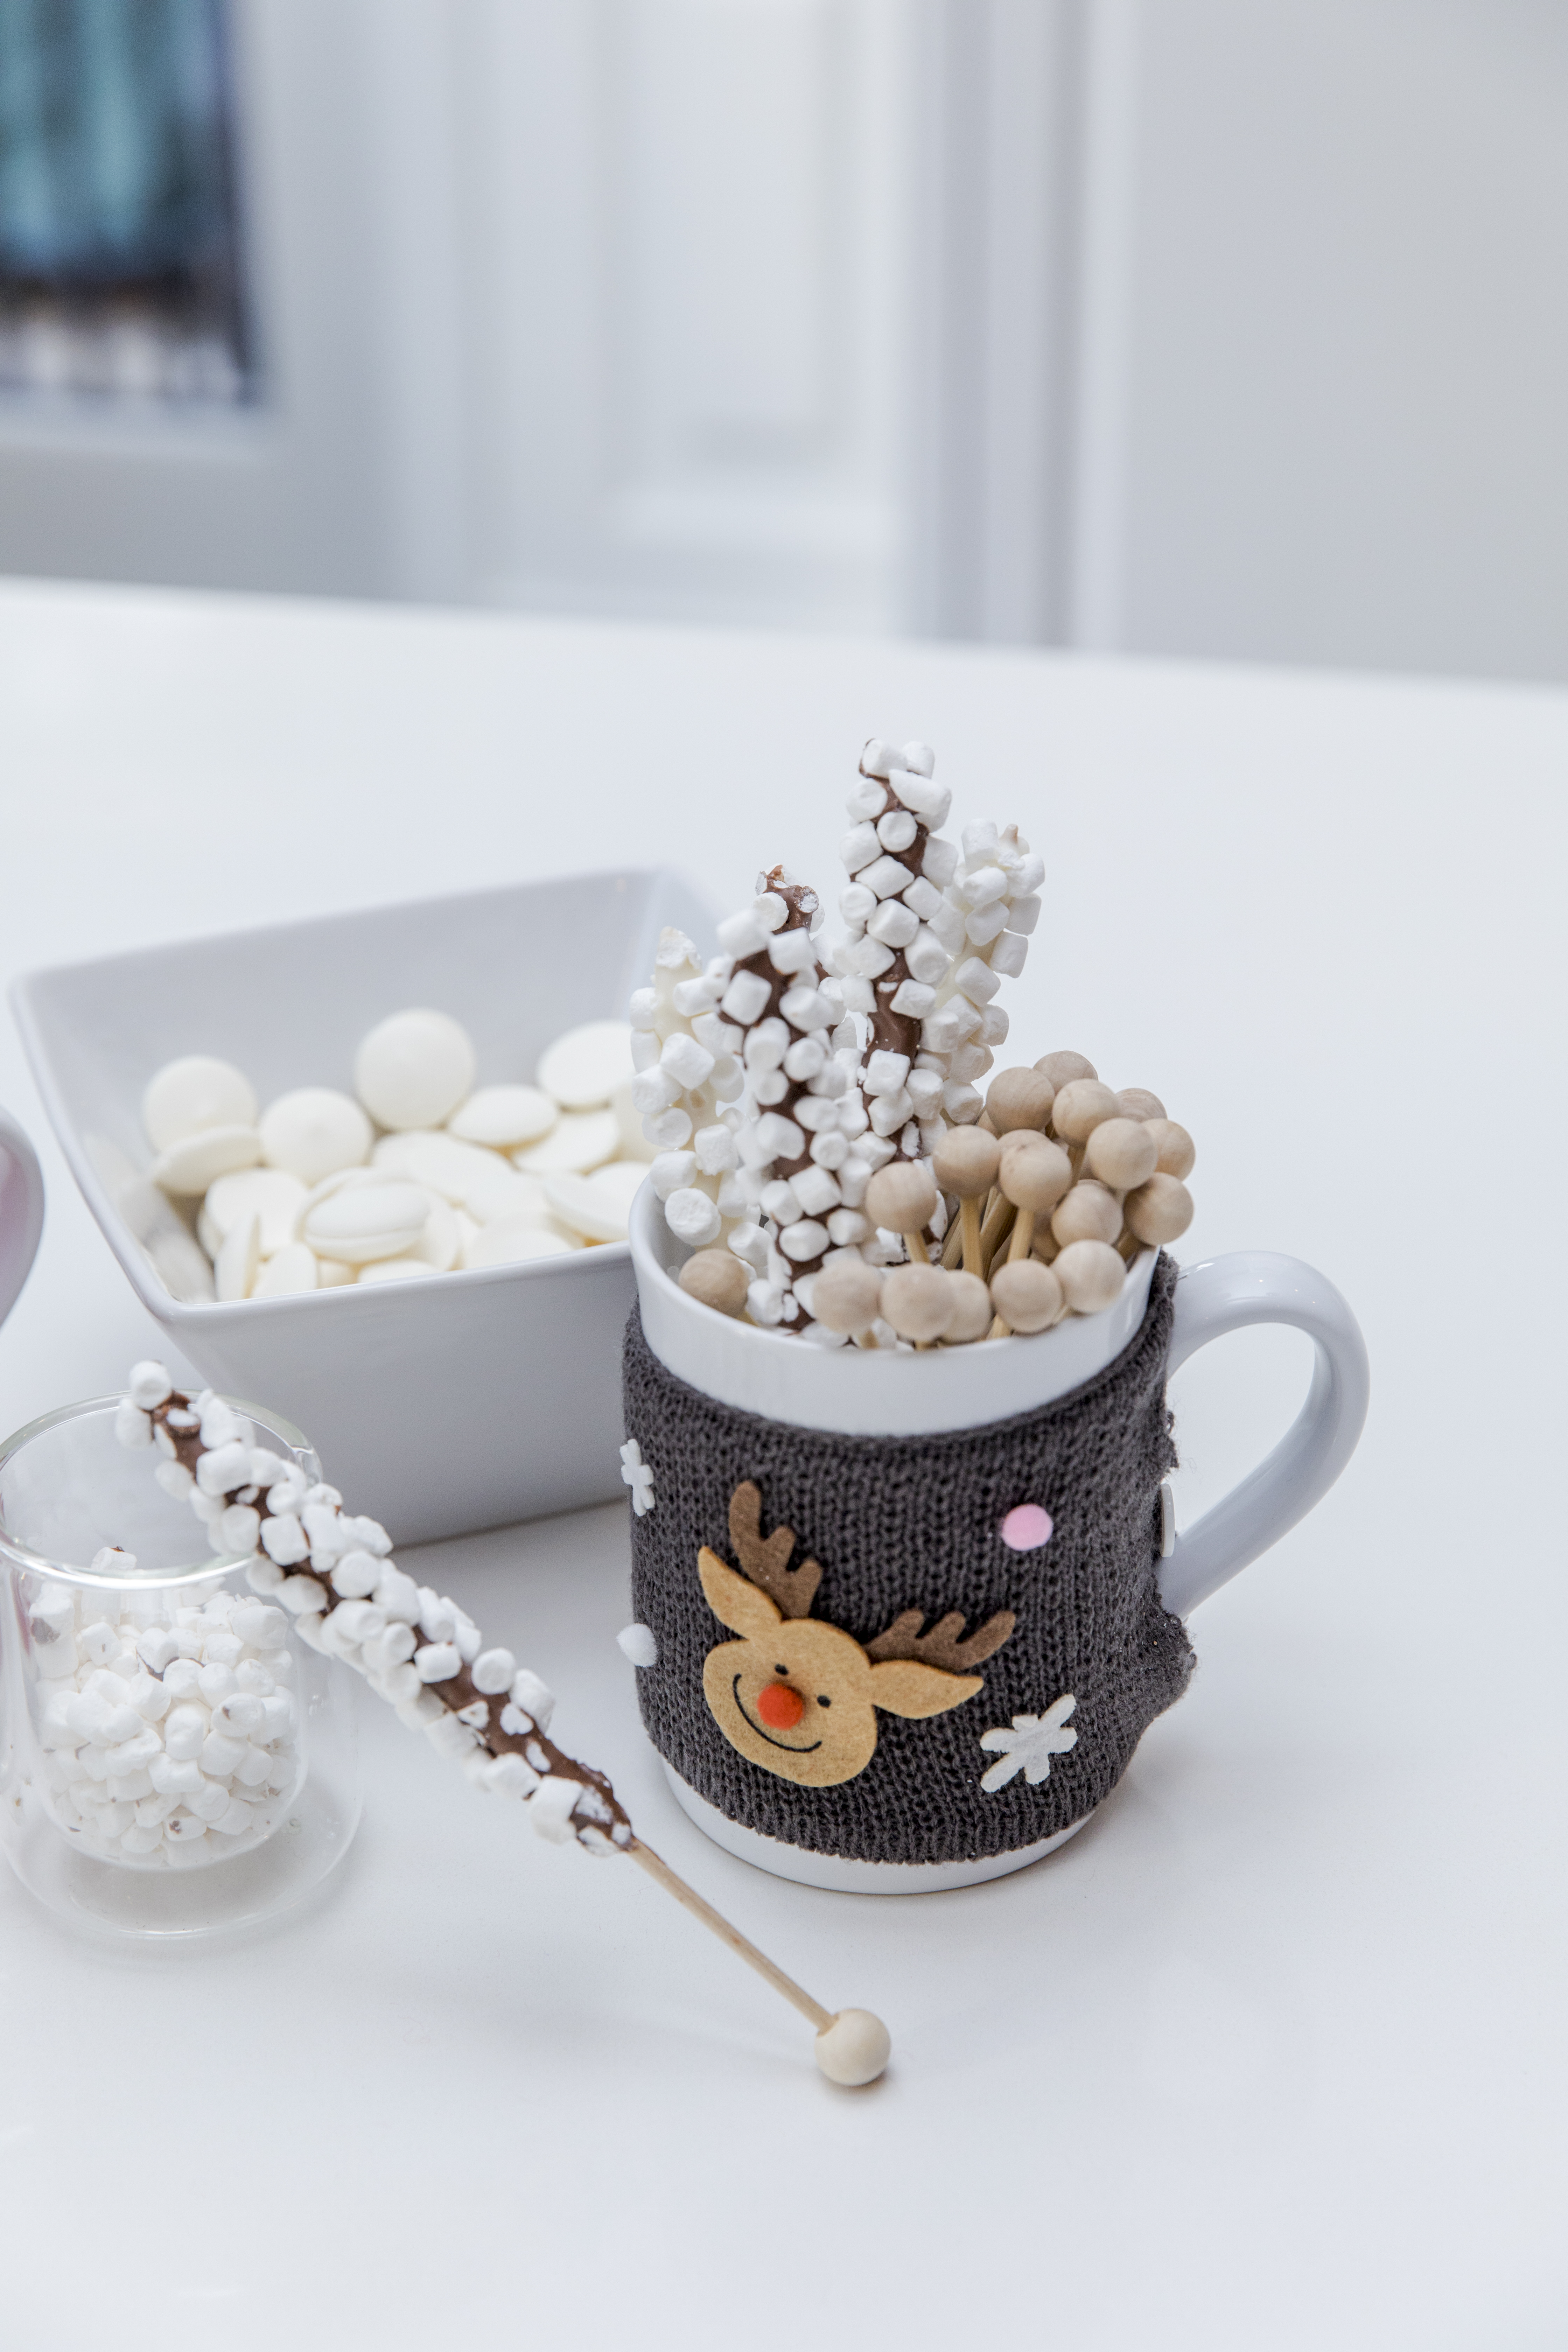 Forever Freckled is making adorable white chocolate marshmallow stirs for the holidays